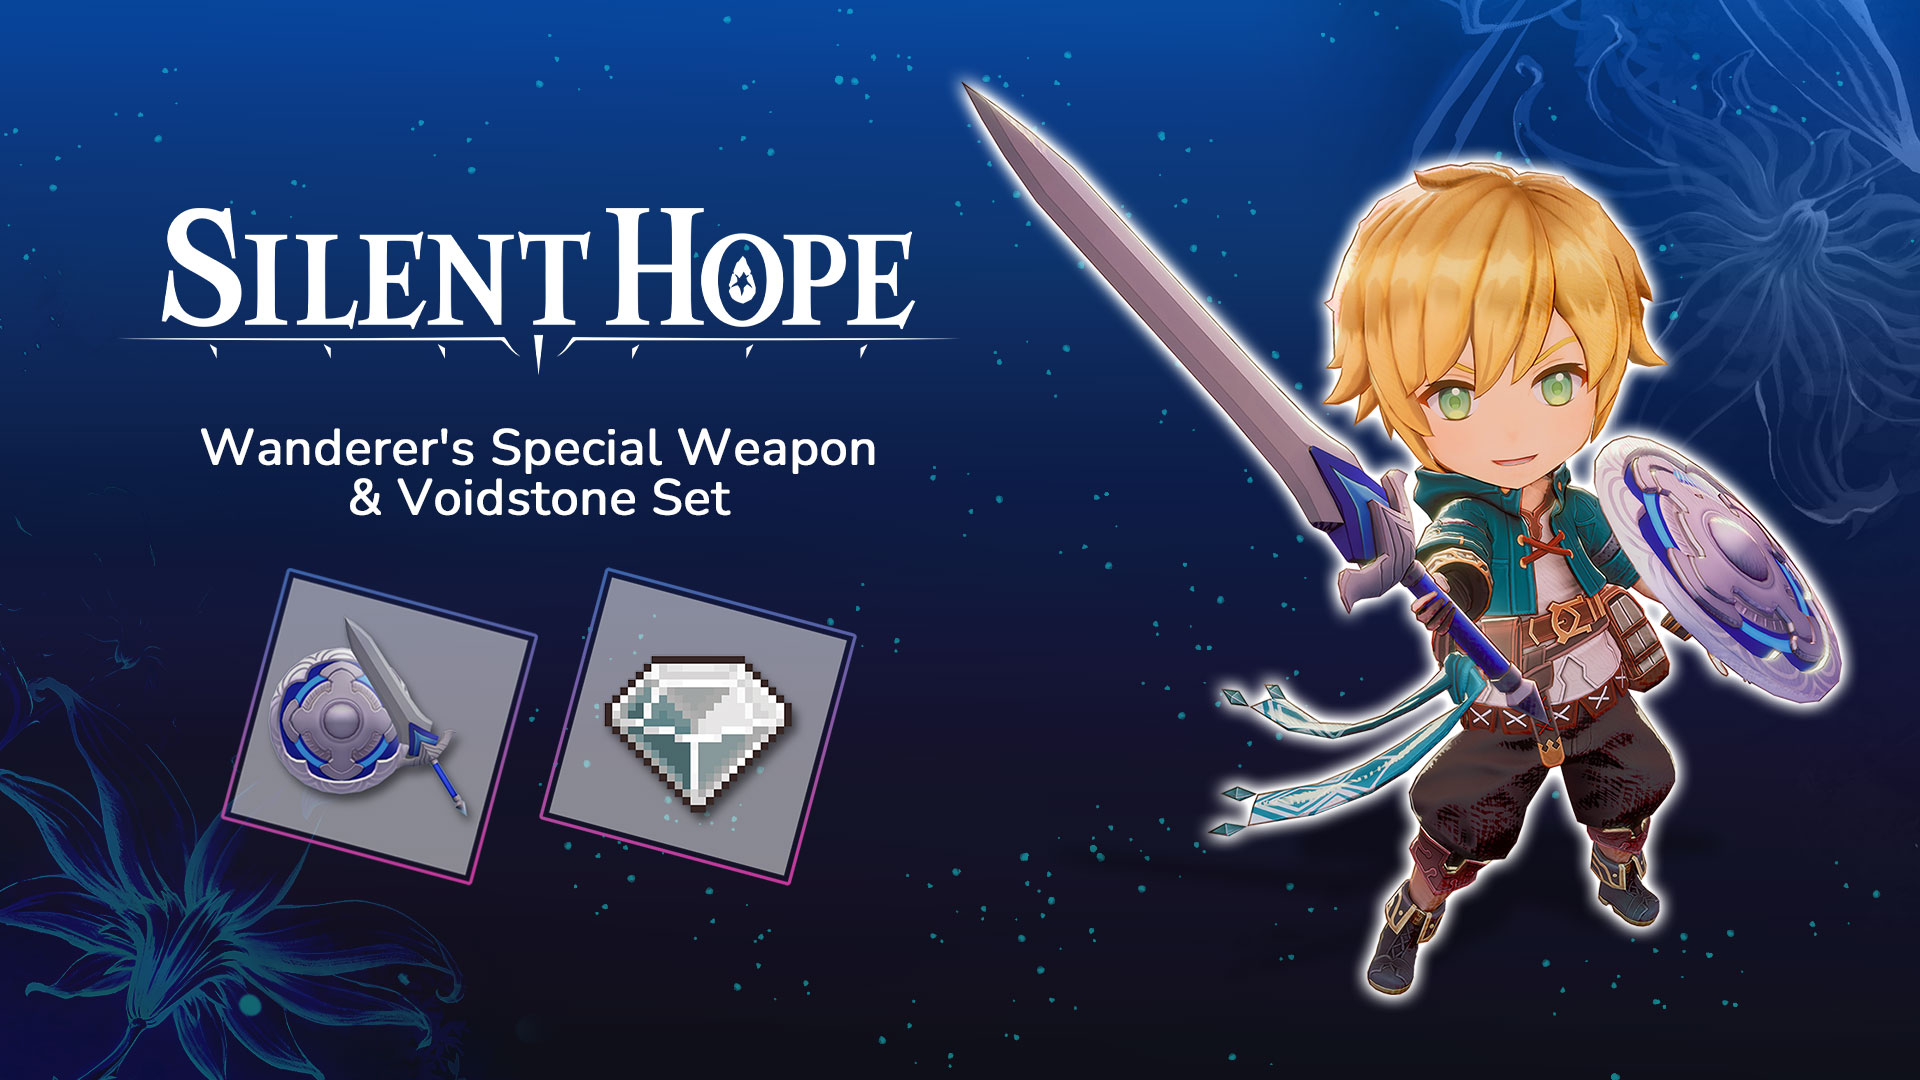 Wanderer's Special Weapon & Voidstone Set